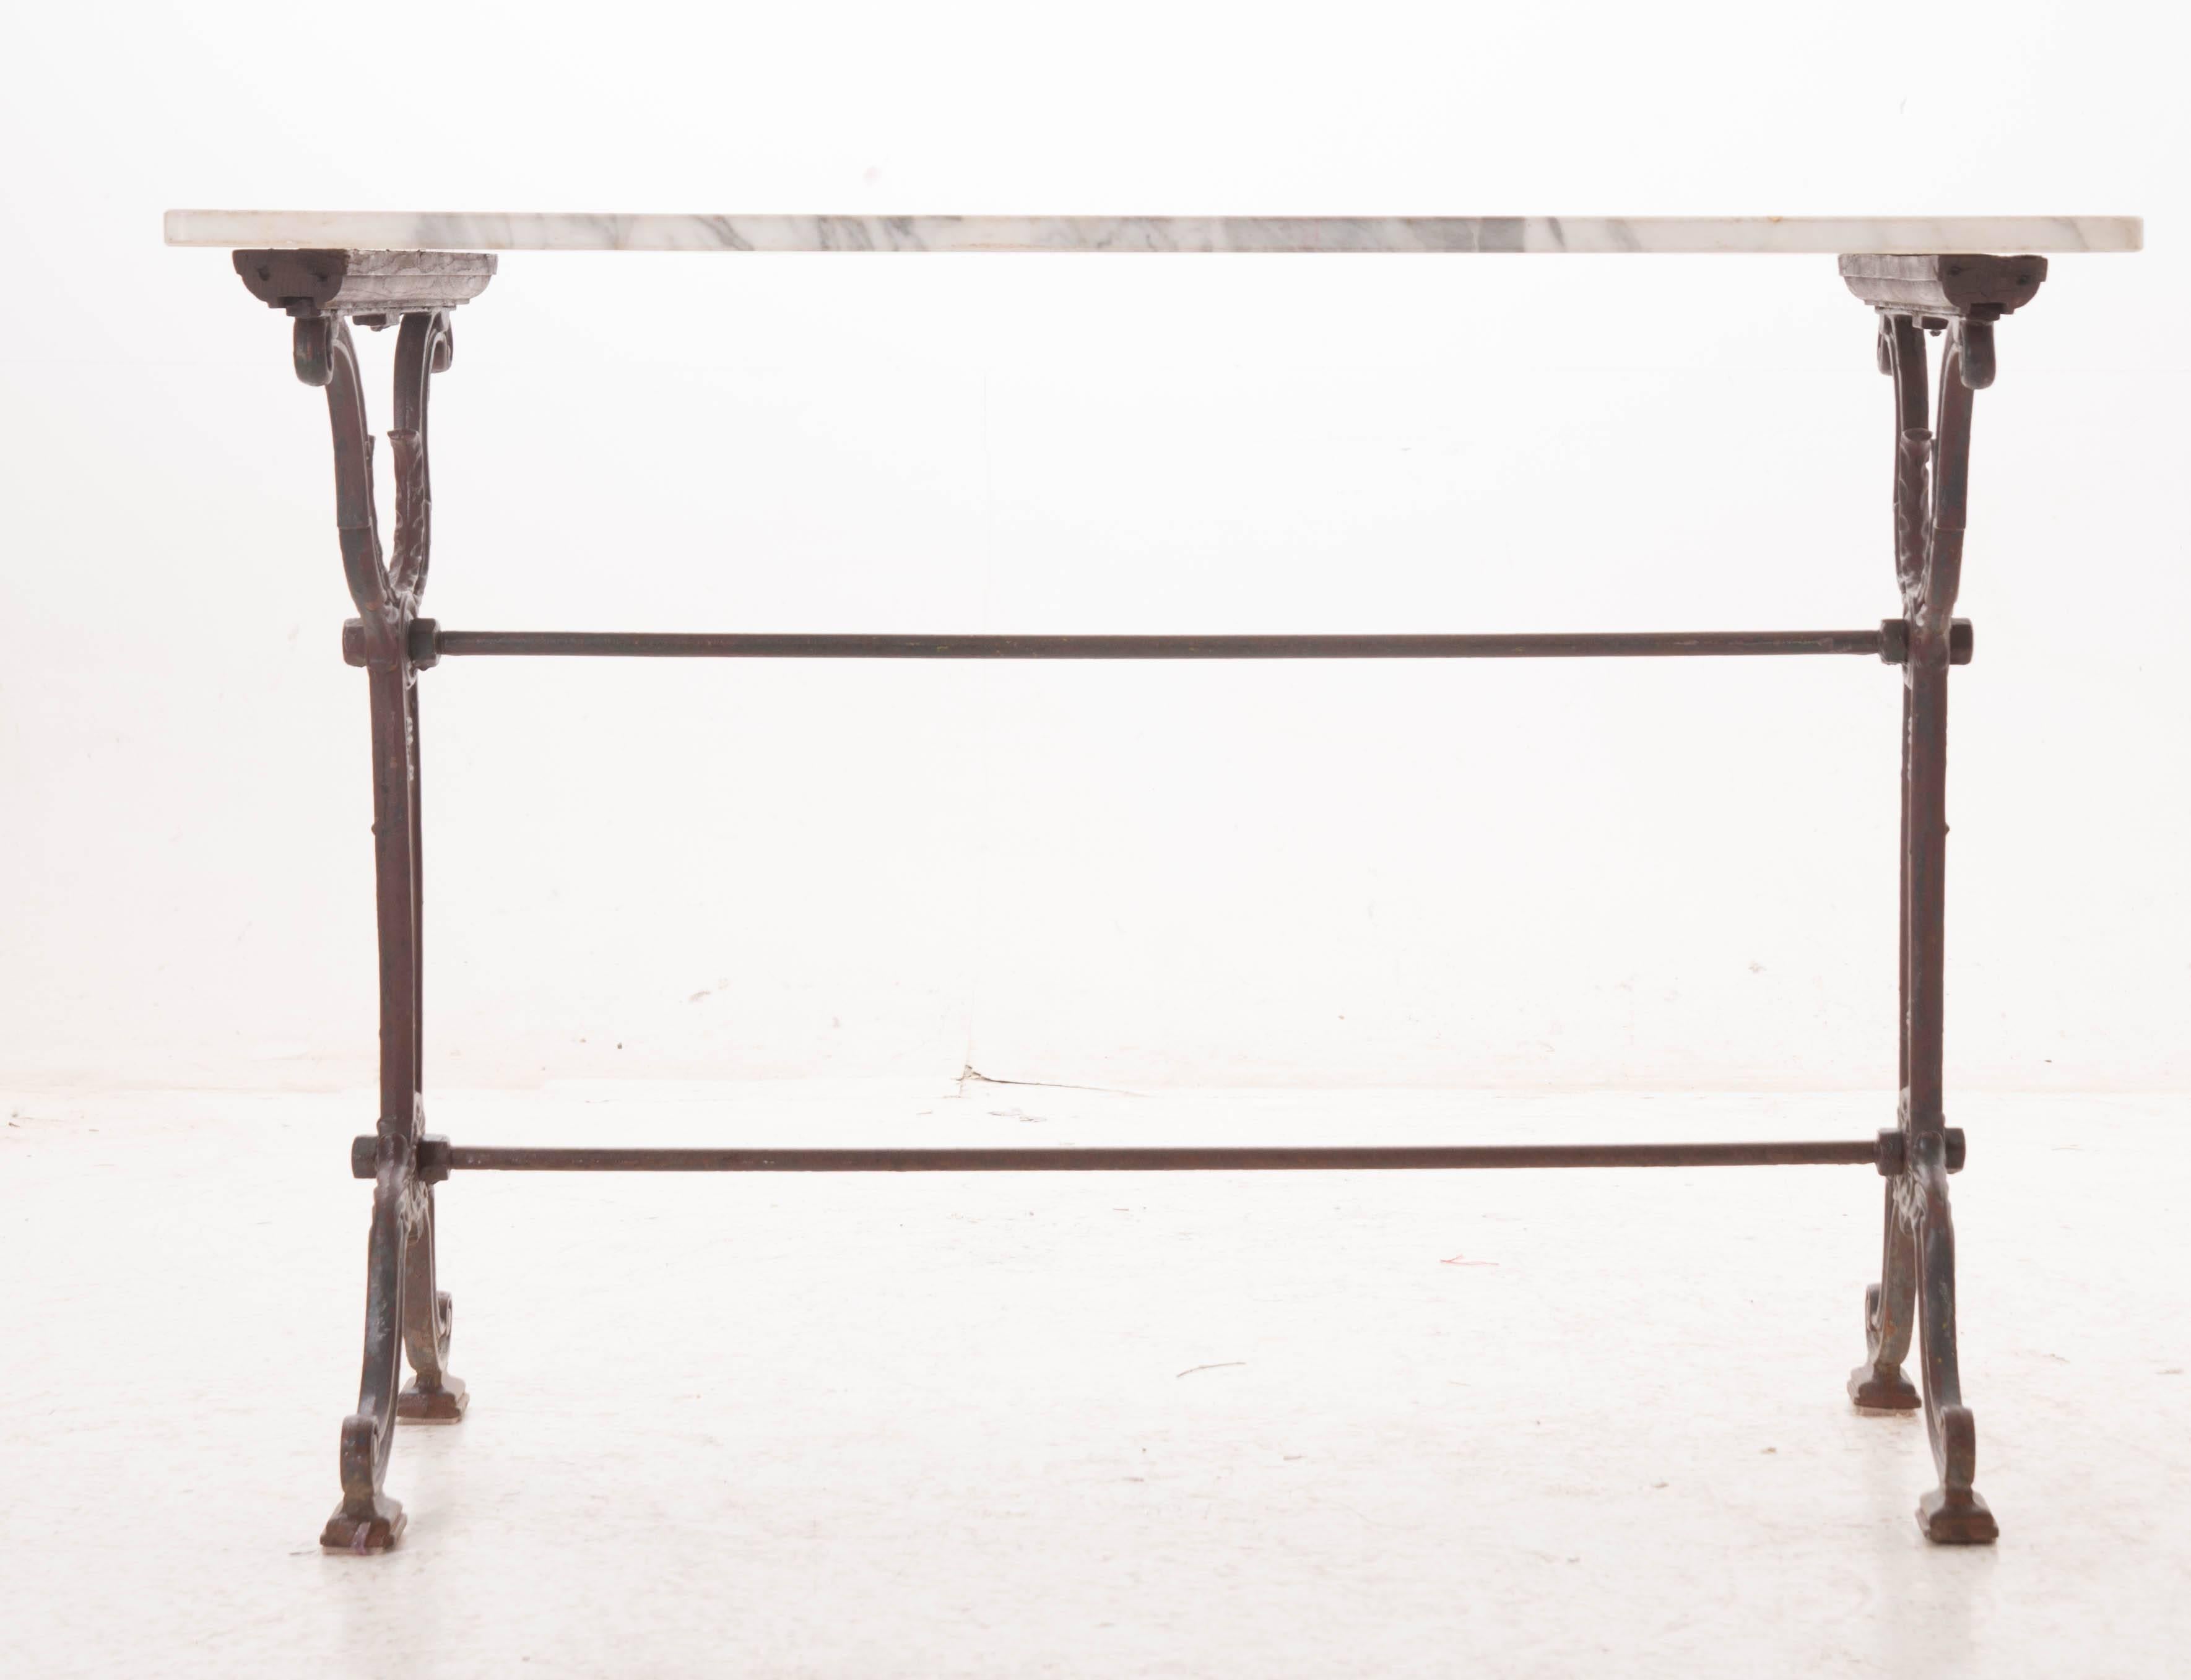 A fabulous cast iron bistro table from early 20th century, France. A great size for serving, this marble top table would make a spectacular addition to your patio or outdoor space.